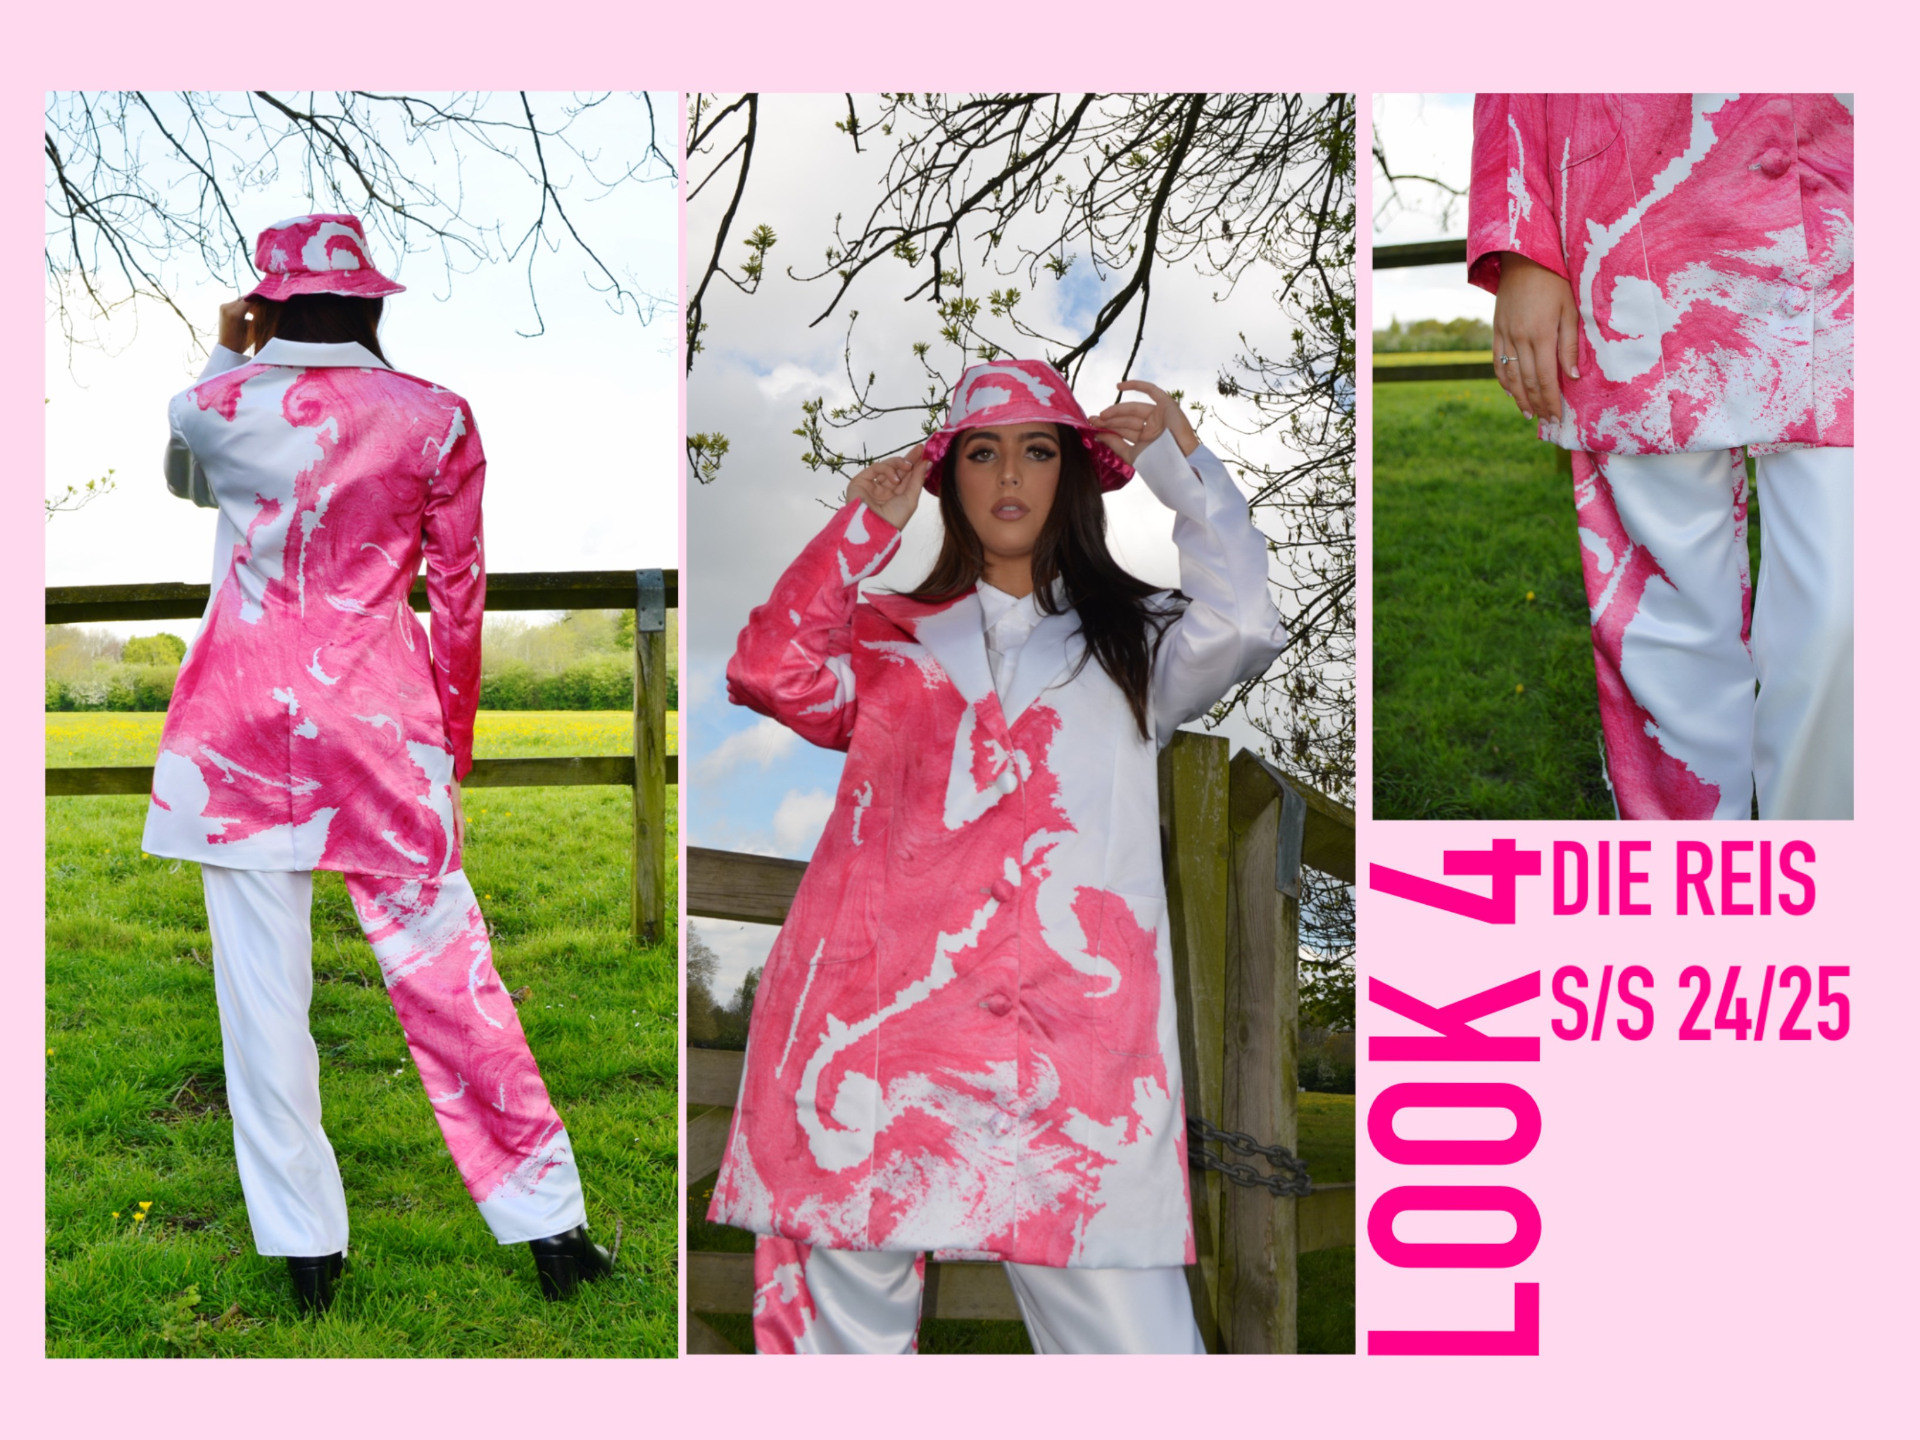 Three photos of female model wearing pink and white outfit in field